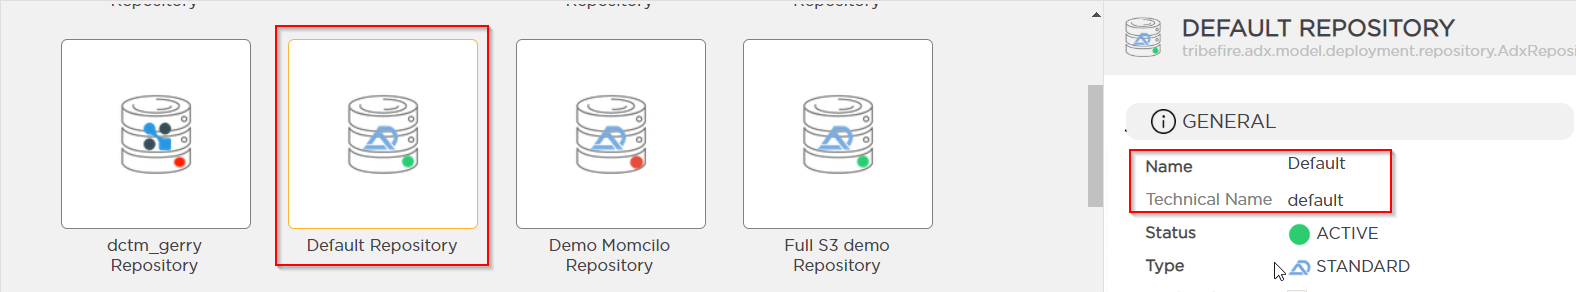 Repository names in the Administration Area user interface